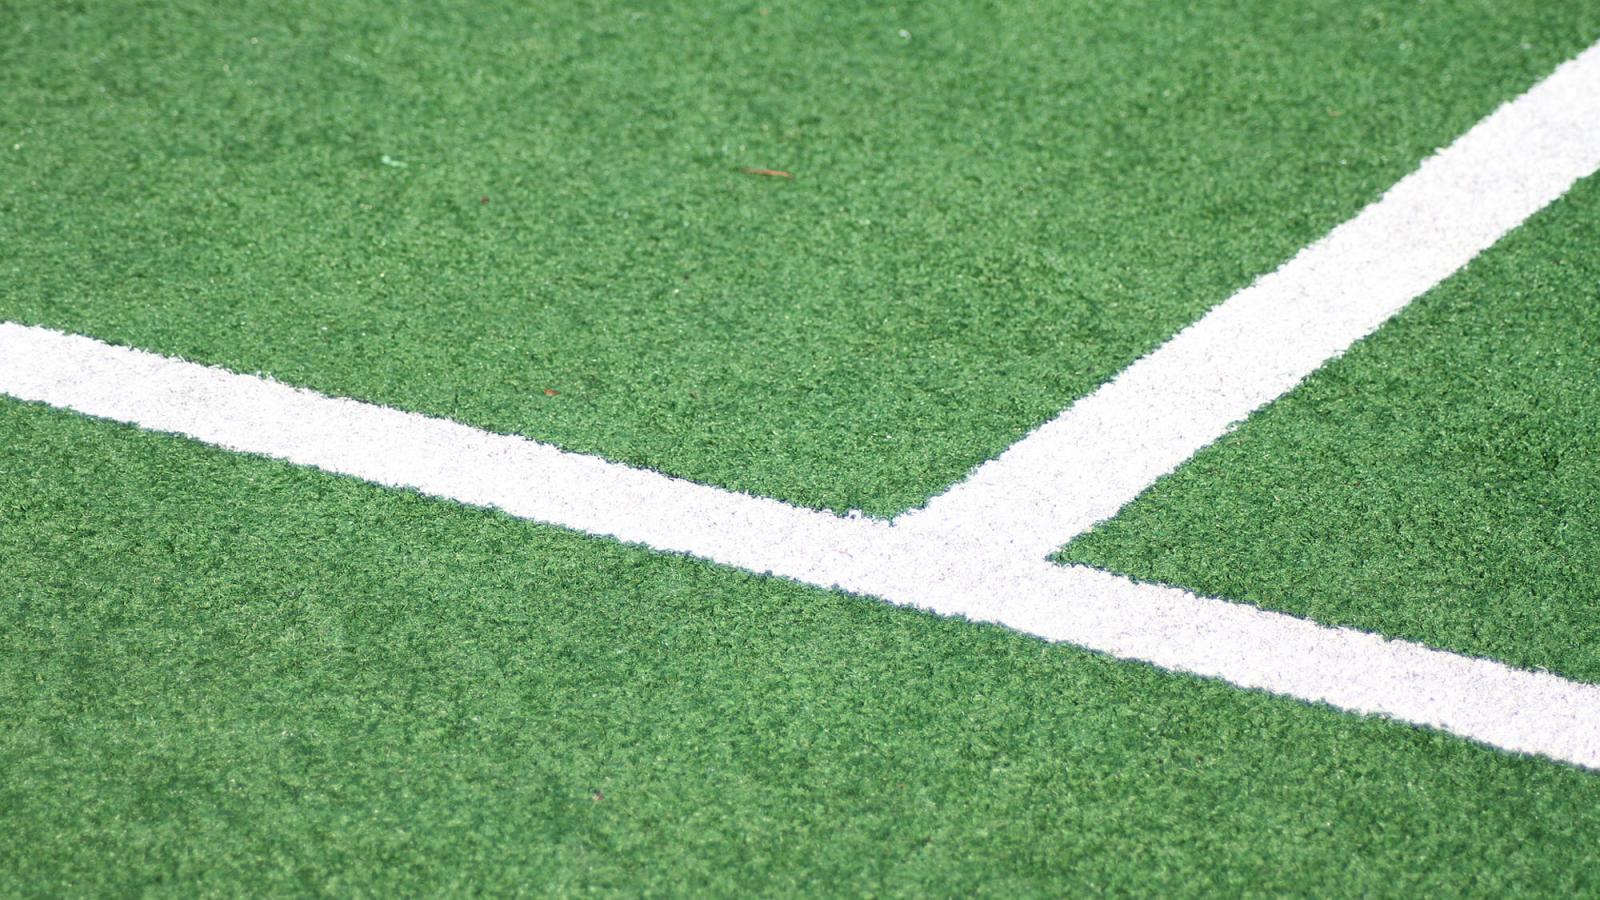 close view of field hockey pitch with chalk lines